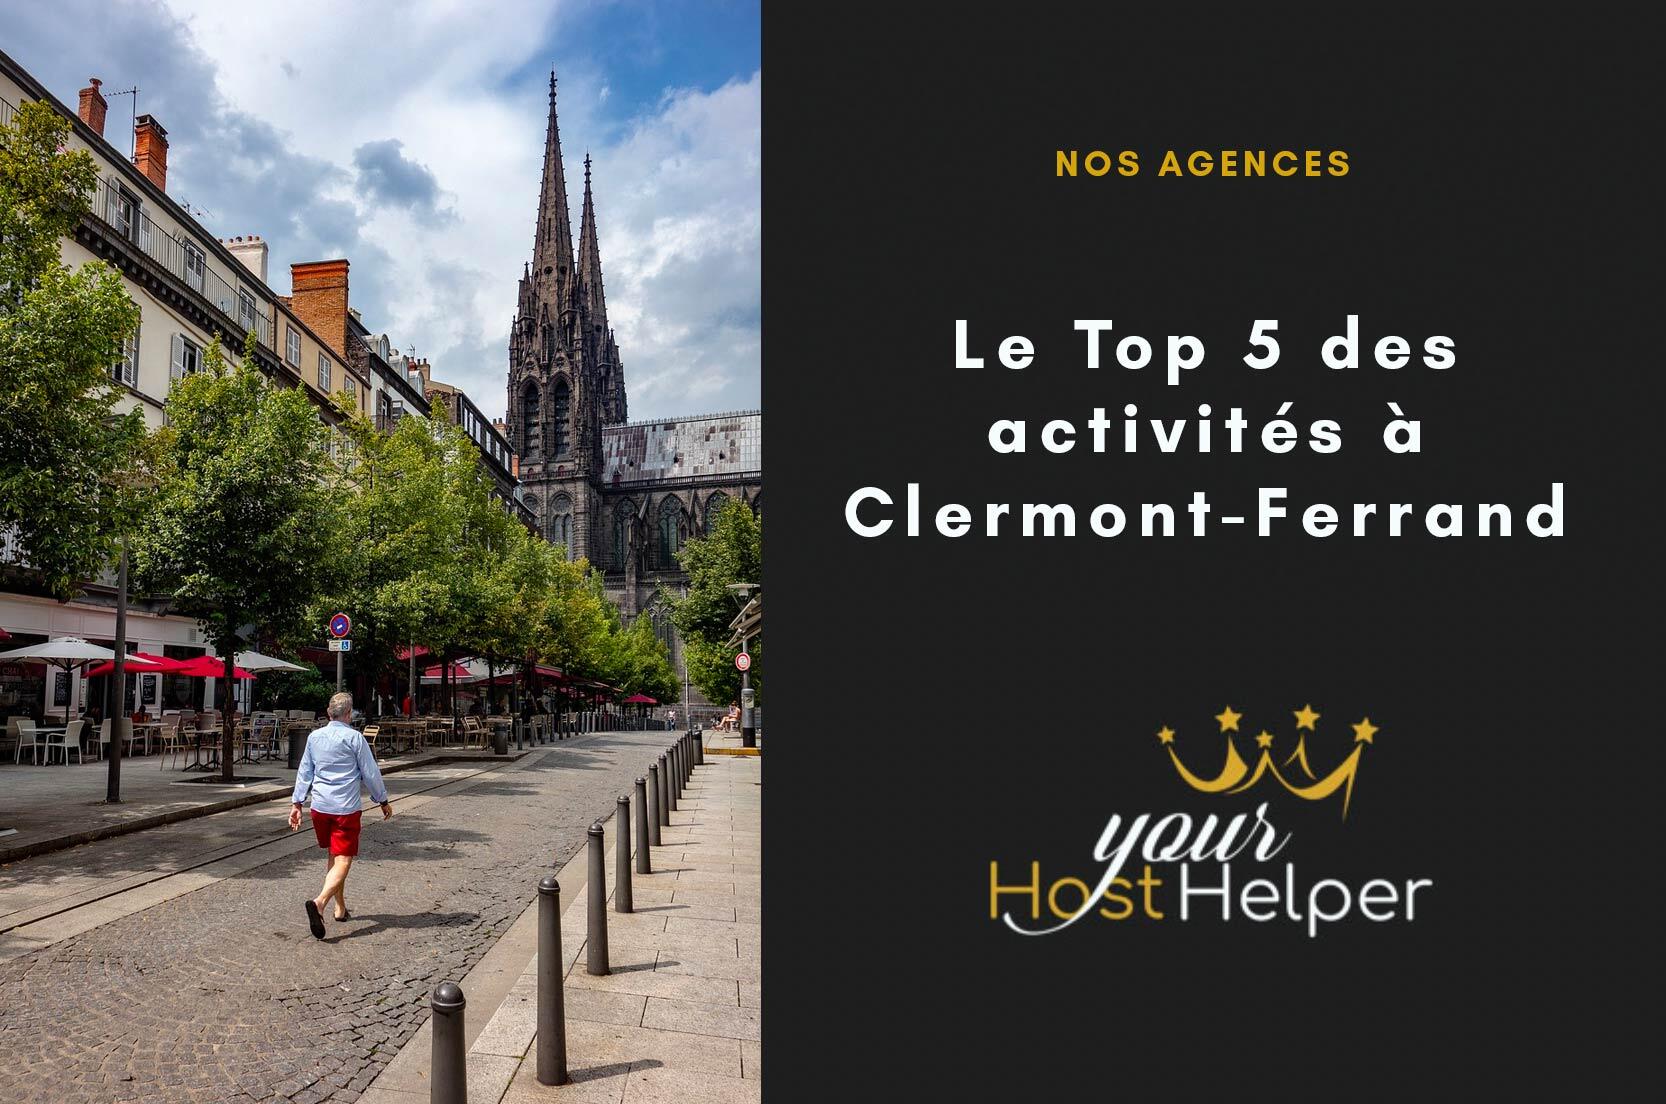 You are currently viewing The Top 5 activities in Clermont-Ferrand seen by our concierge